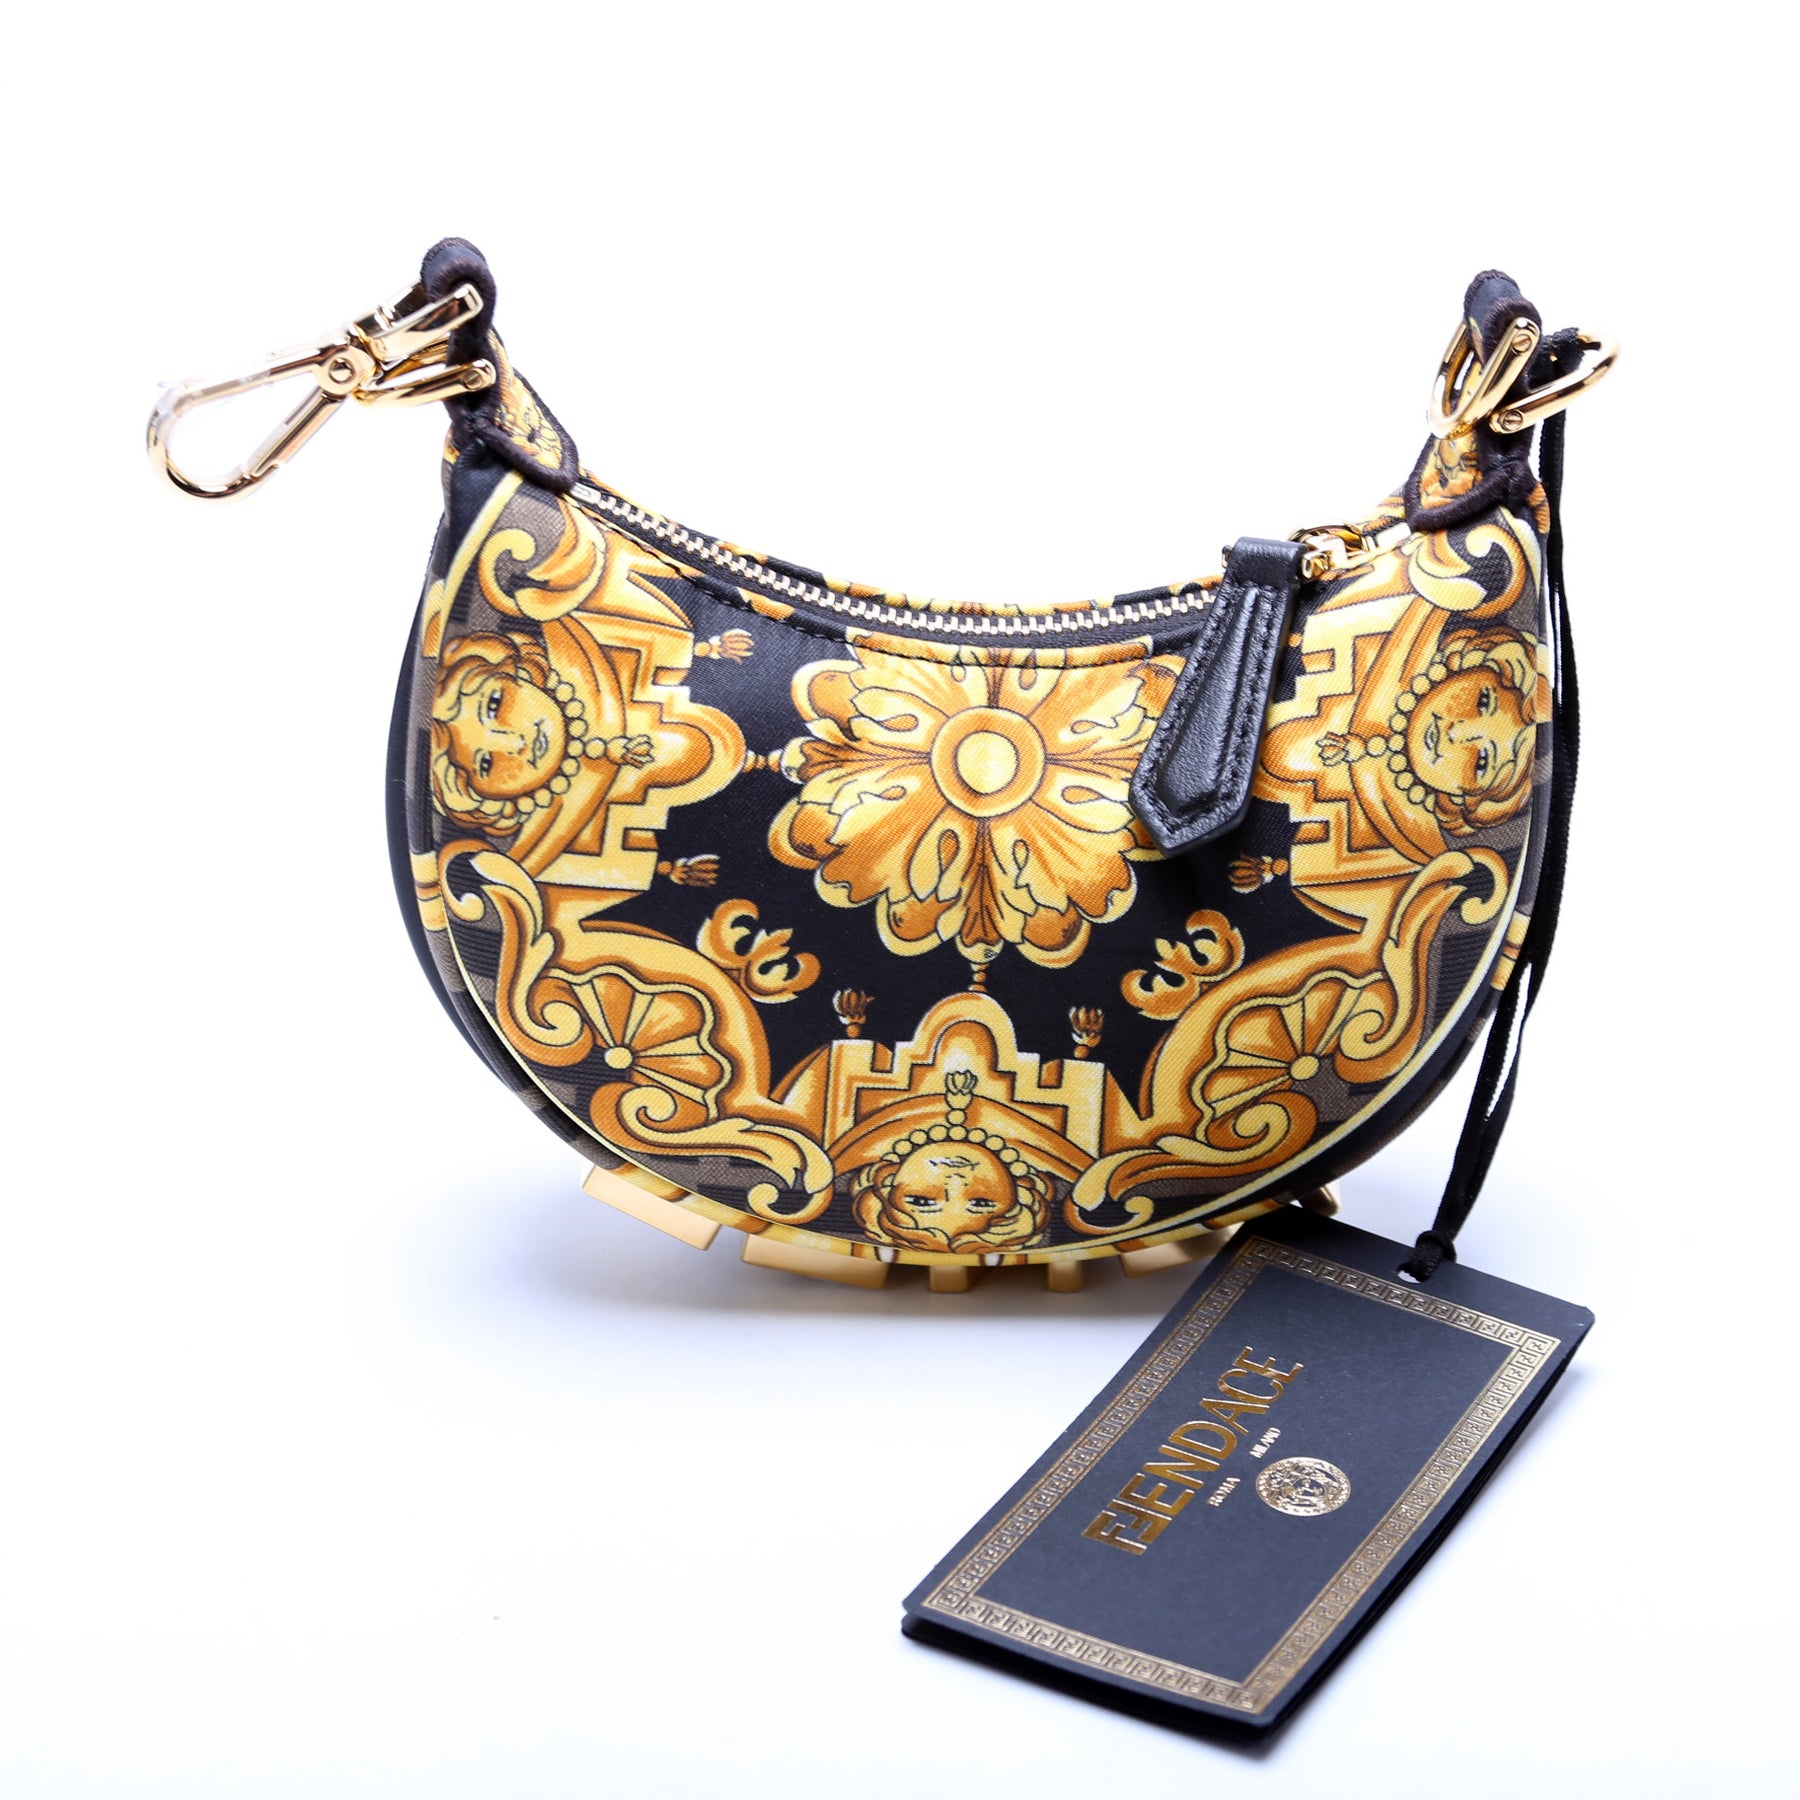 Fendi Small First Bag In Fendace Baroque Fabric Gold